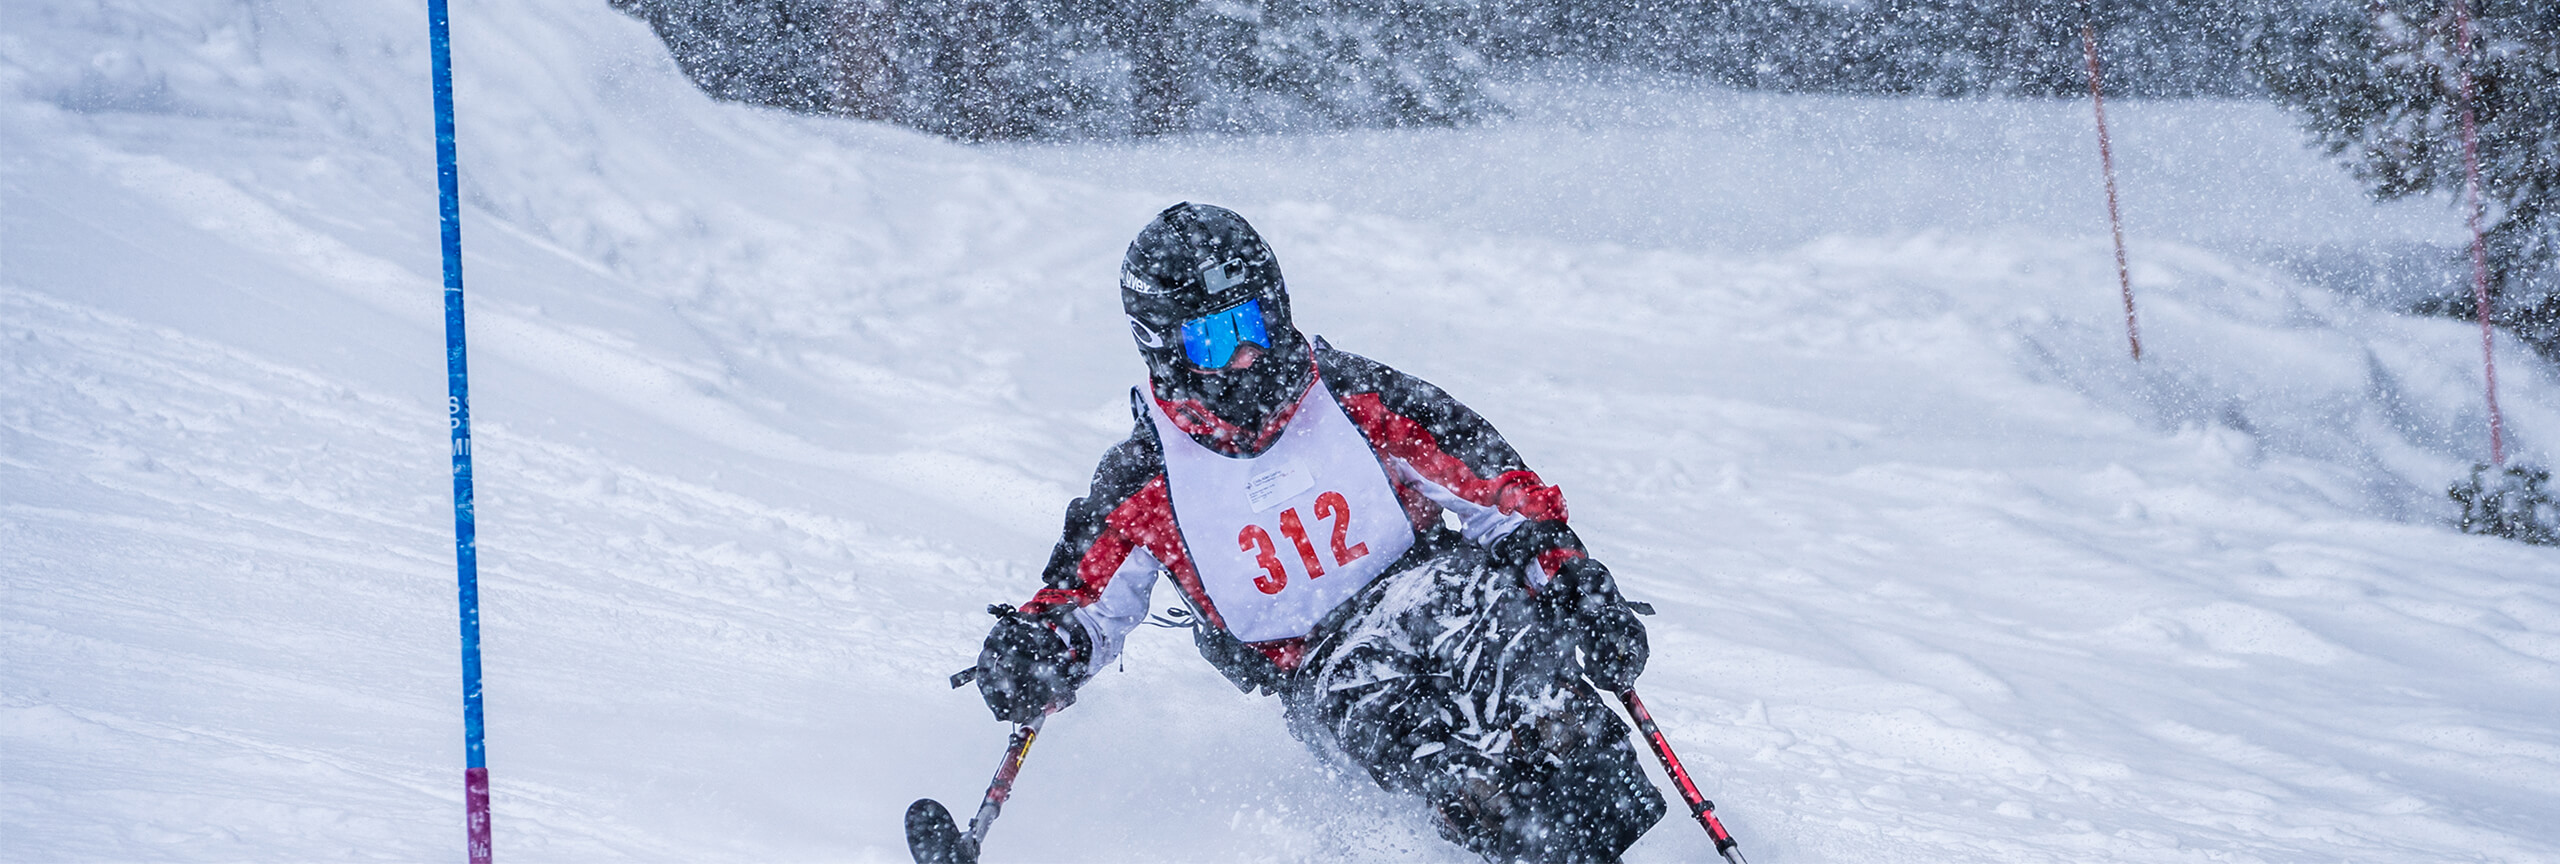 Sit skier skiing in powder at Special Olympics at Copper Mountain